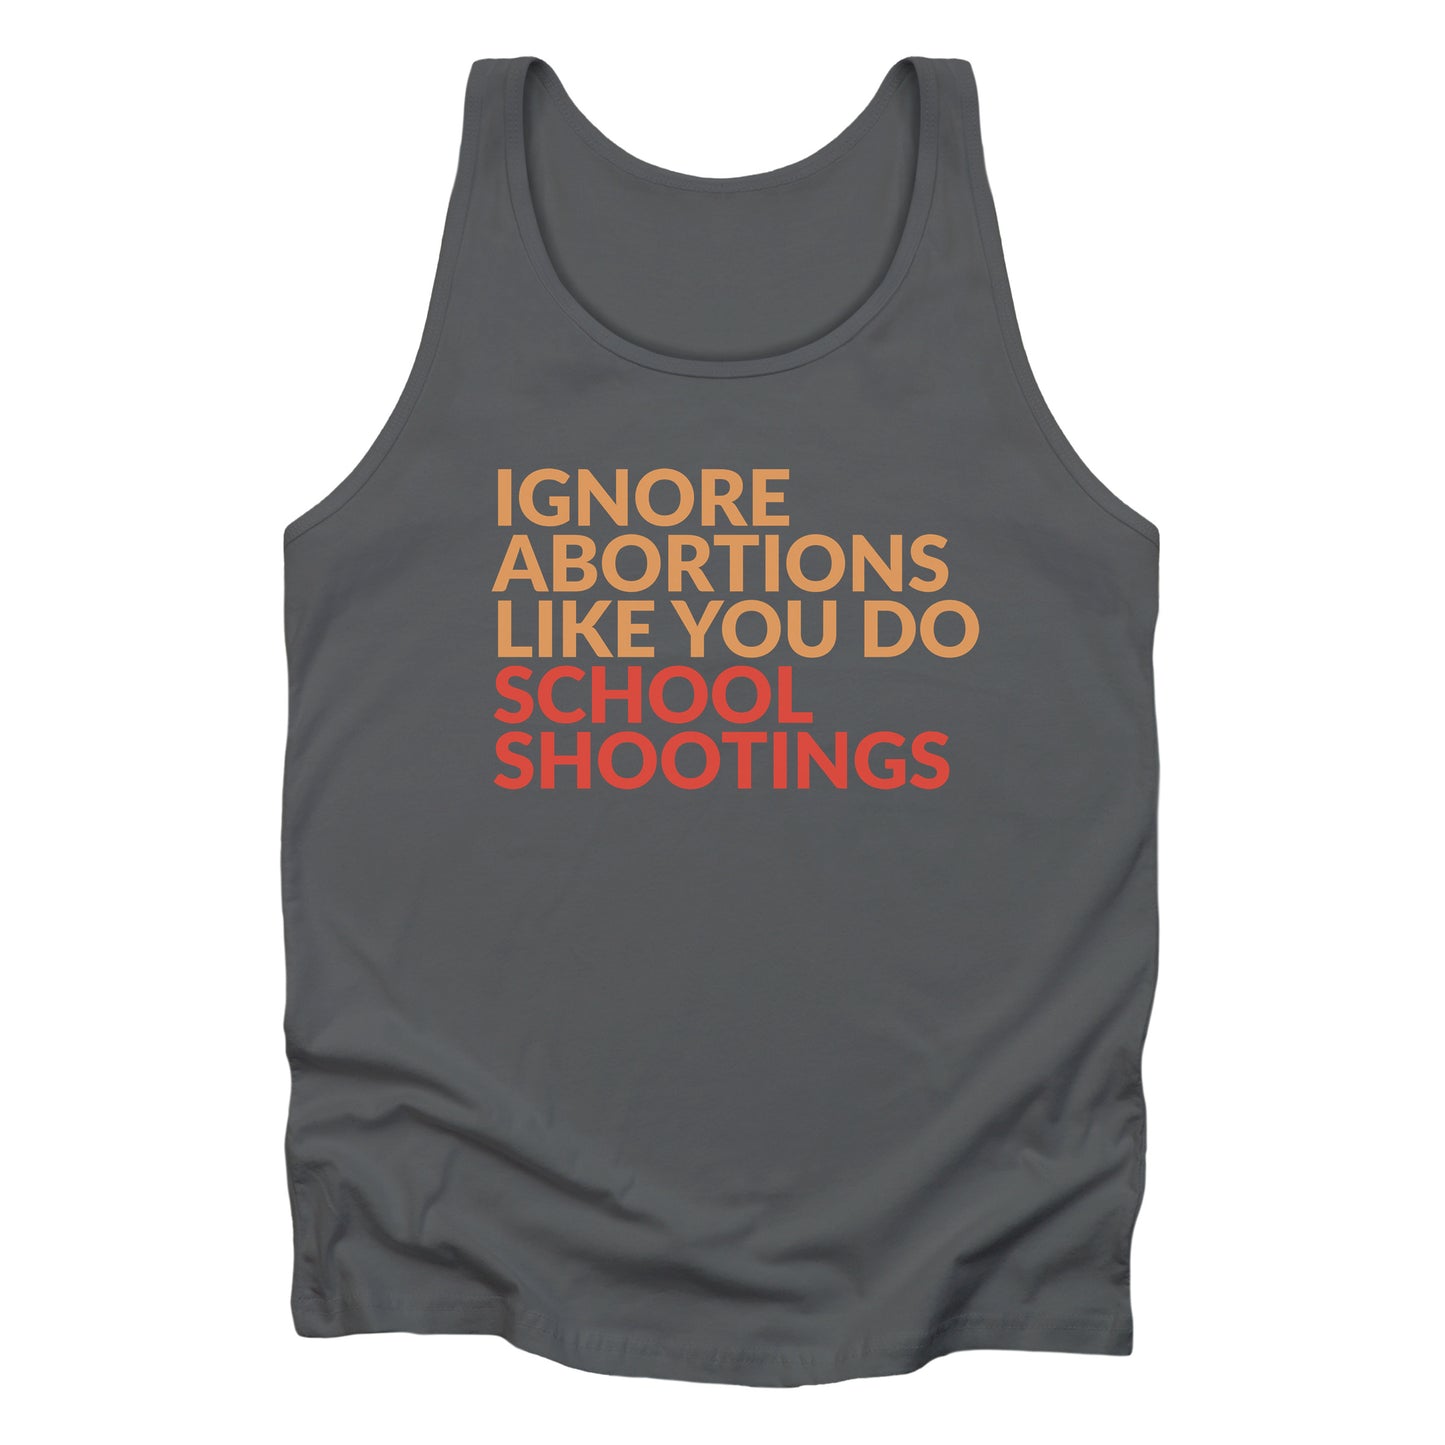 Asphalt color tank top that says “Ignore abortions like you do school shootings” in all caps in an orange font. The words “school shootings” are in red.